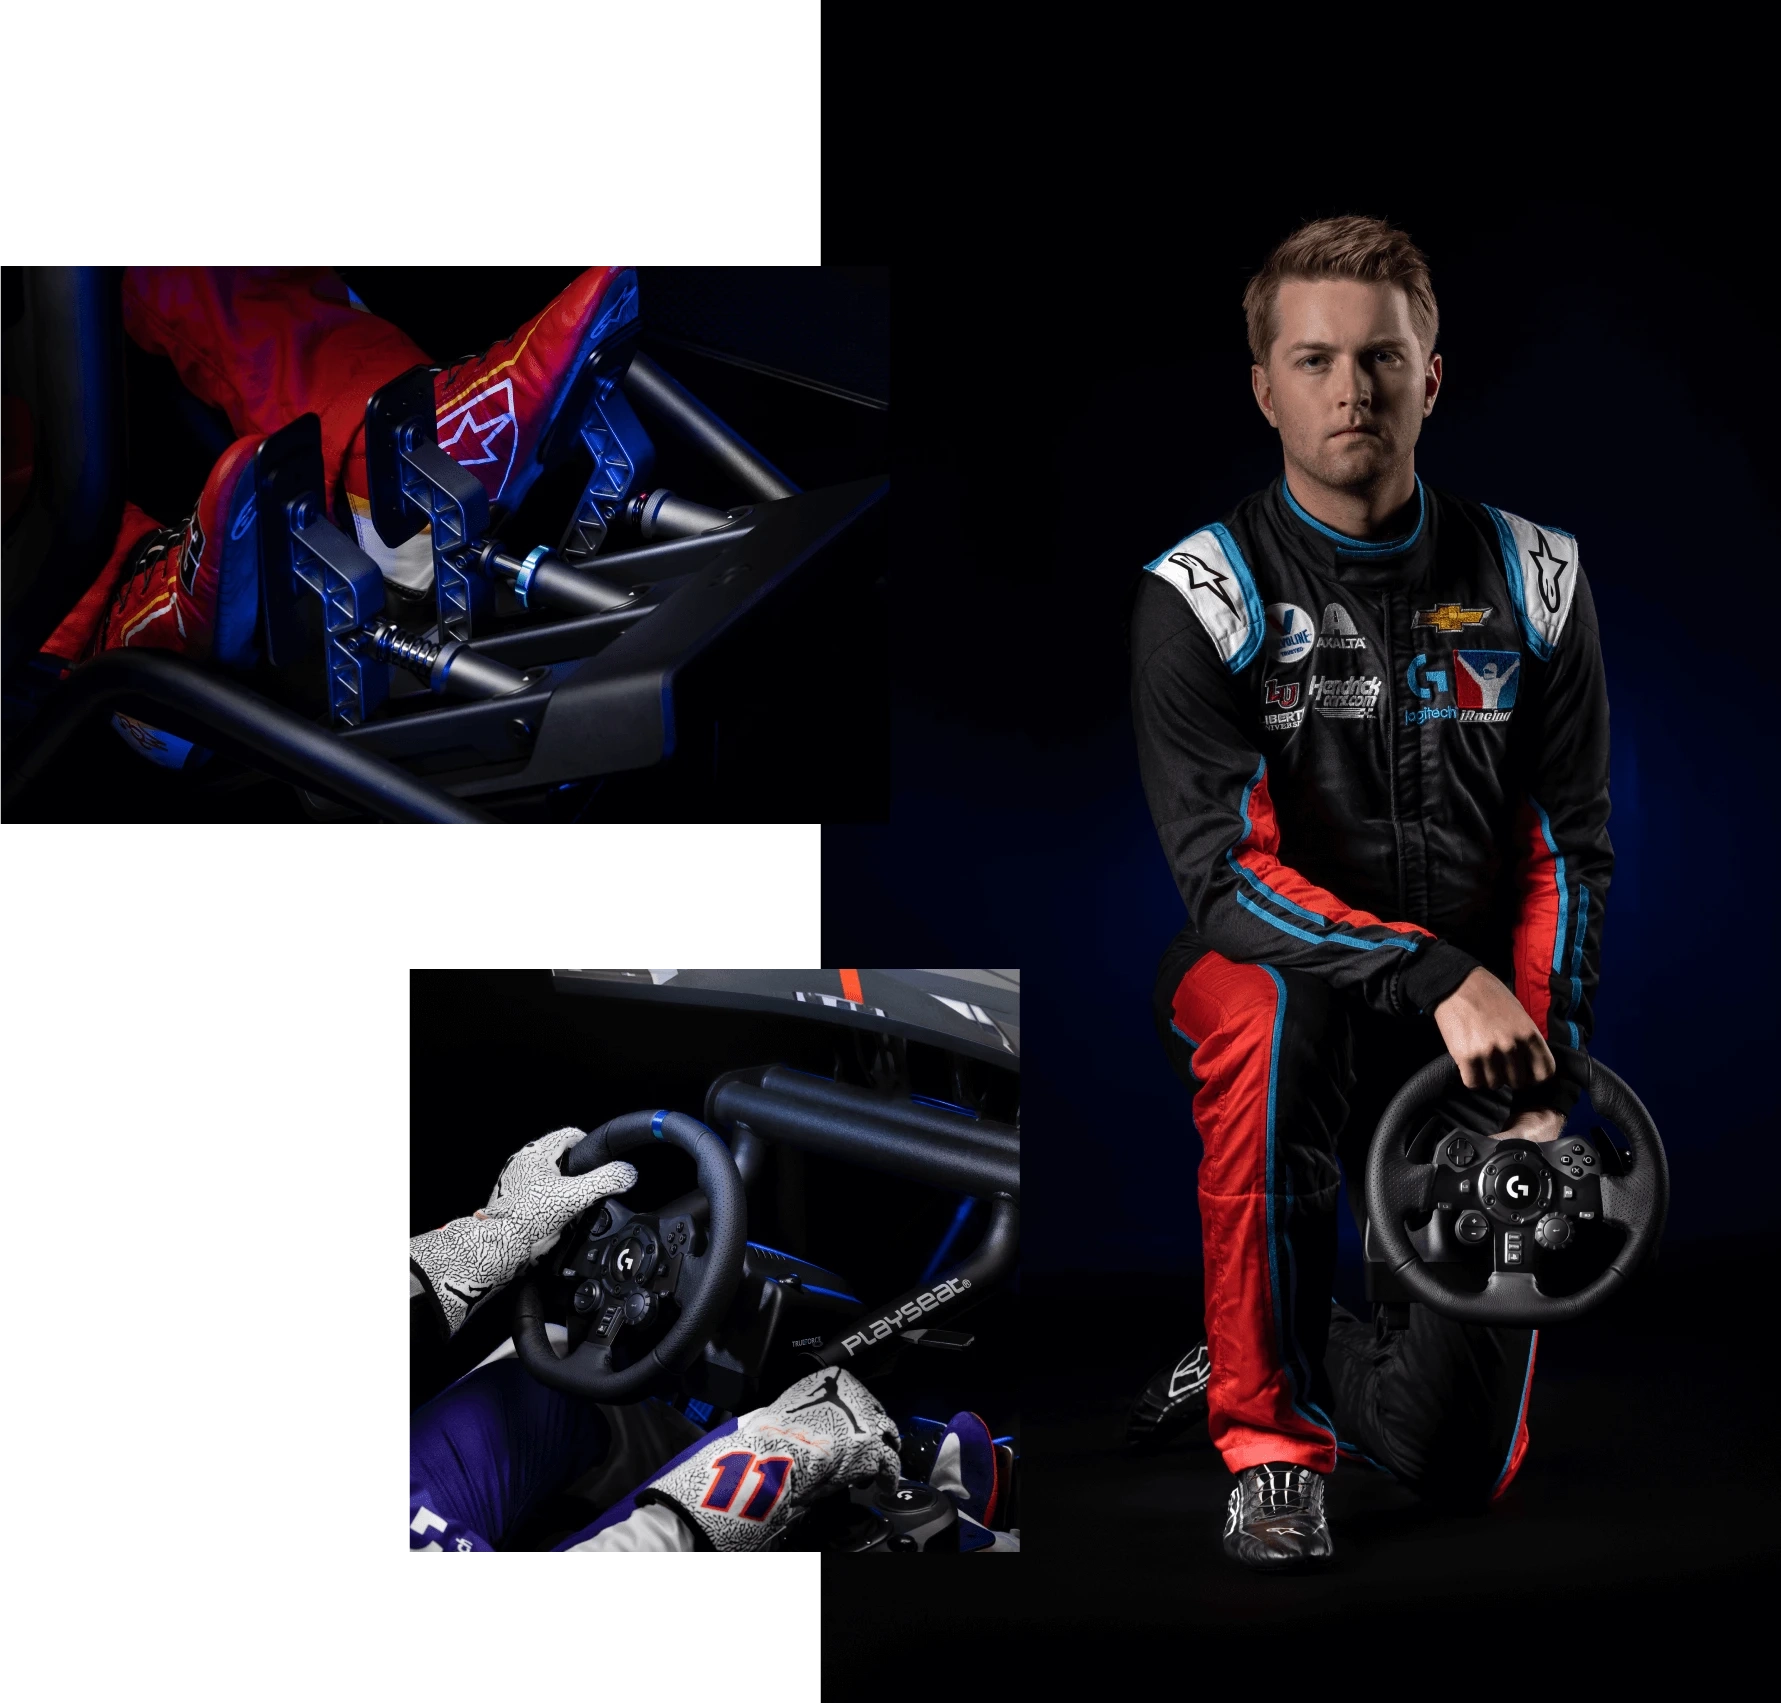 Professional stock car driver William Byron poses with the Logitech G PRO Wheel and Pedals.